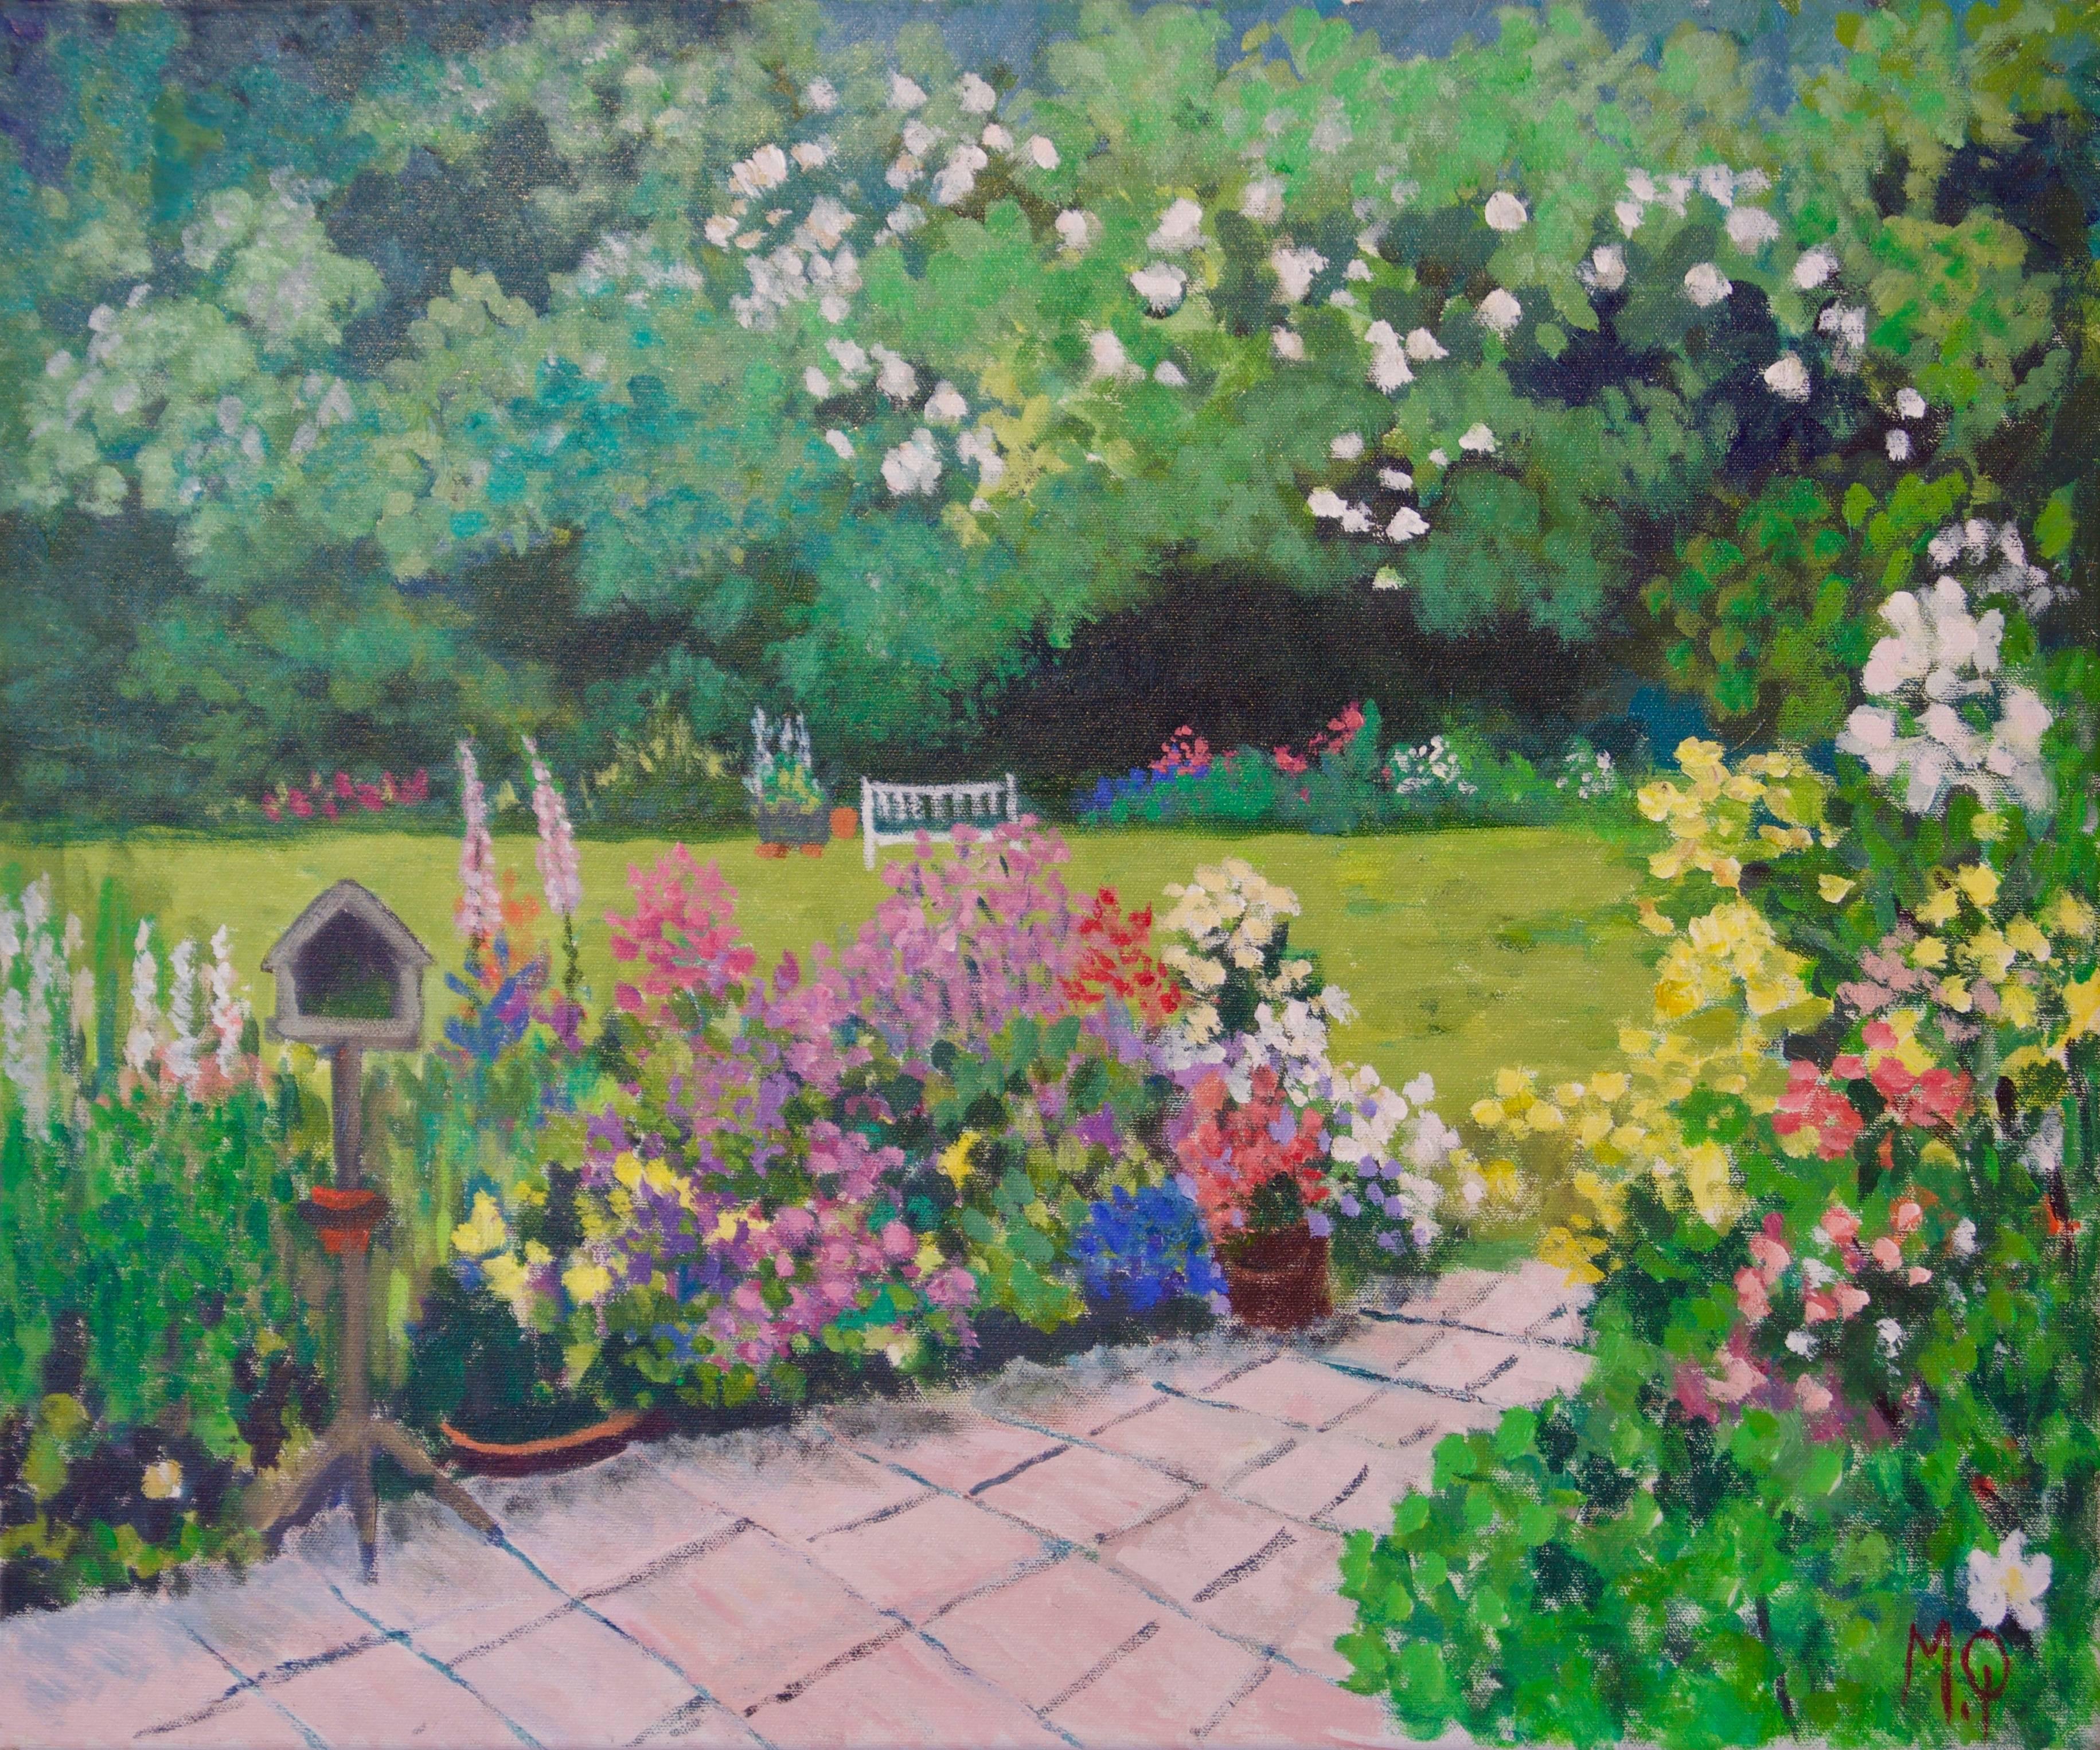 Michael Quirke Landscape Painting - Eve's Garden - Early 21st Century Impressionist Landscape Acrylic by Quirke